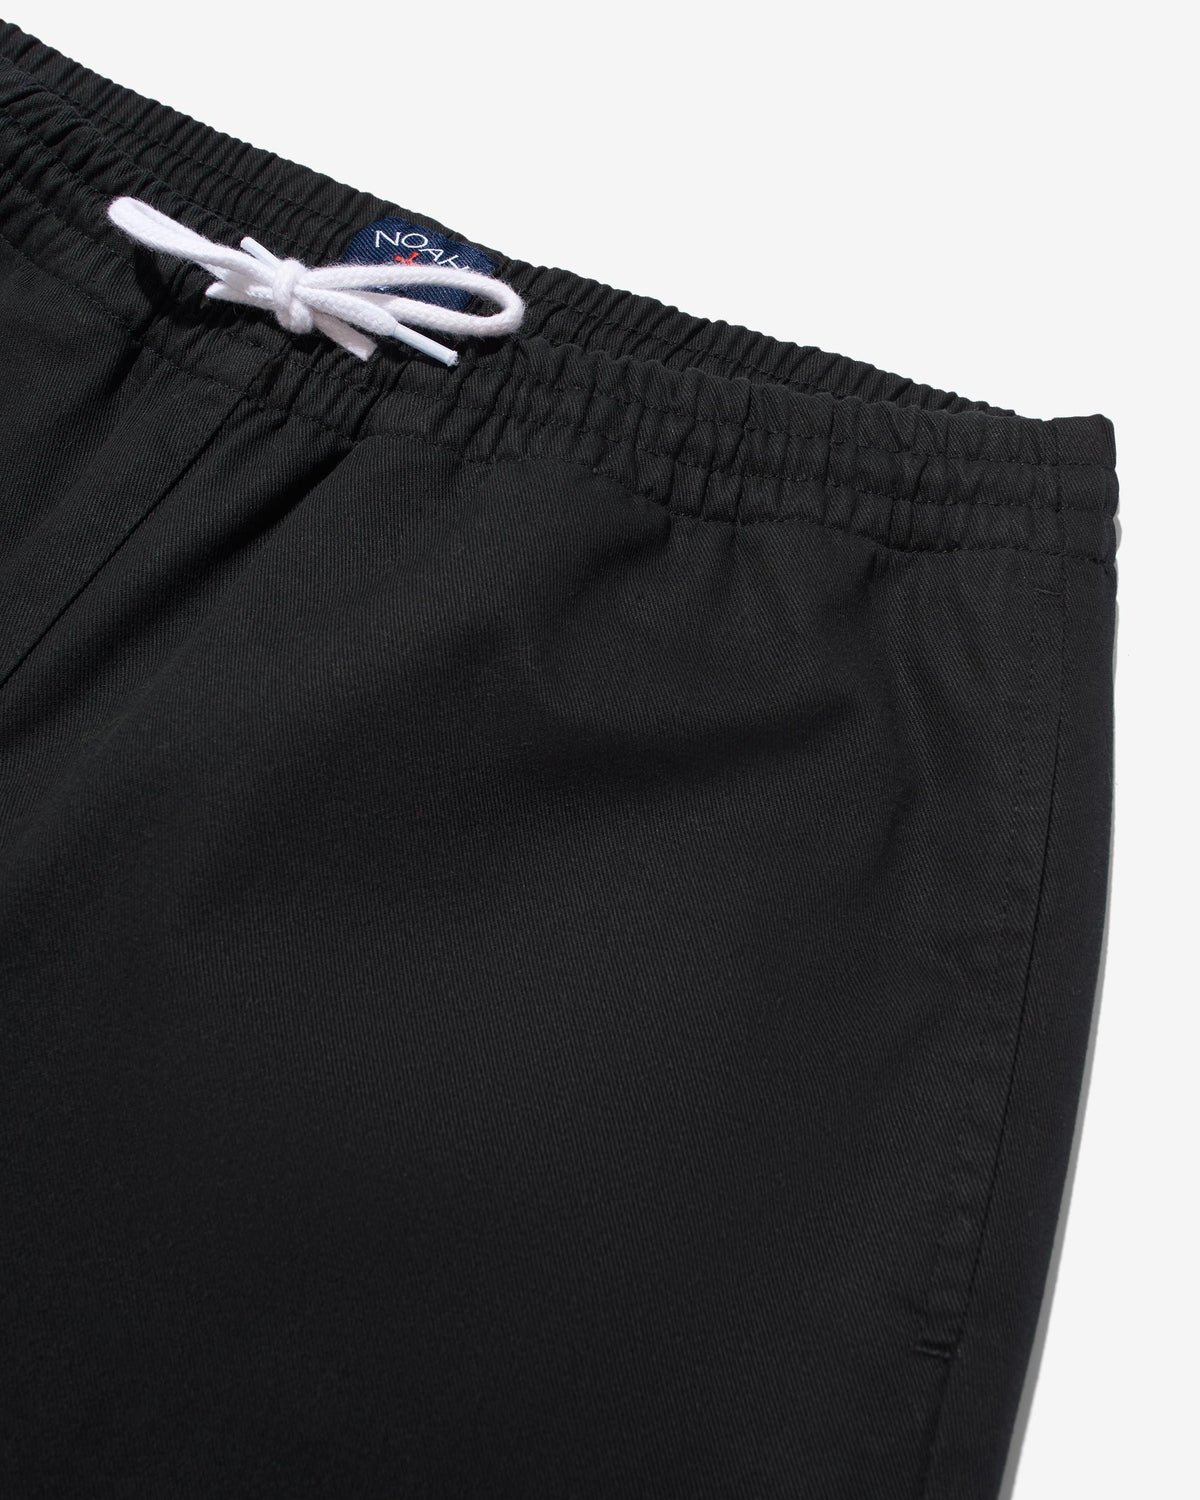 NOAH CLUBHOUSE   Twill Shorts